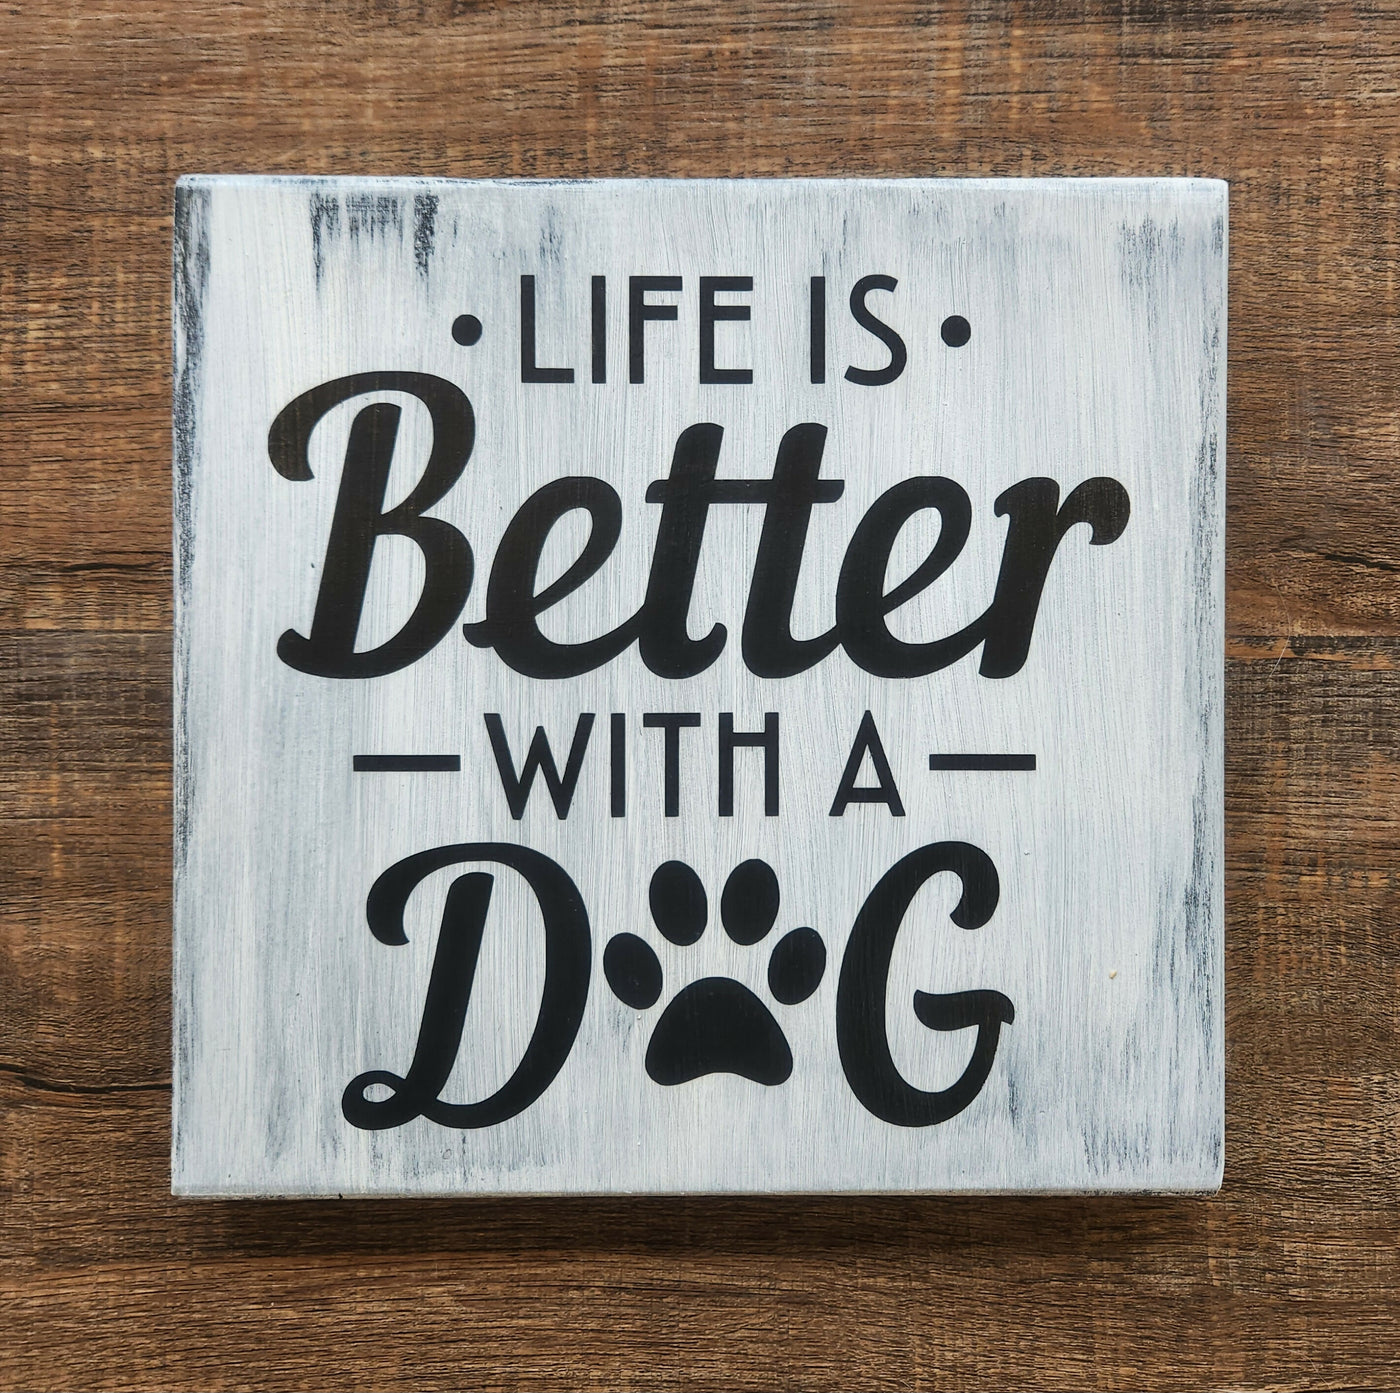 Life is better with a dog sign